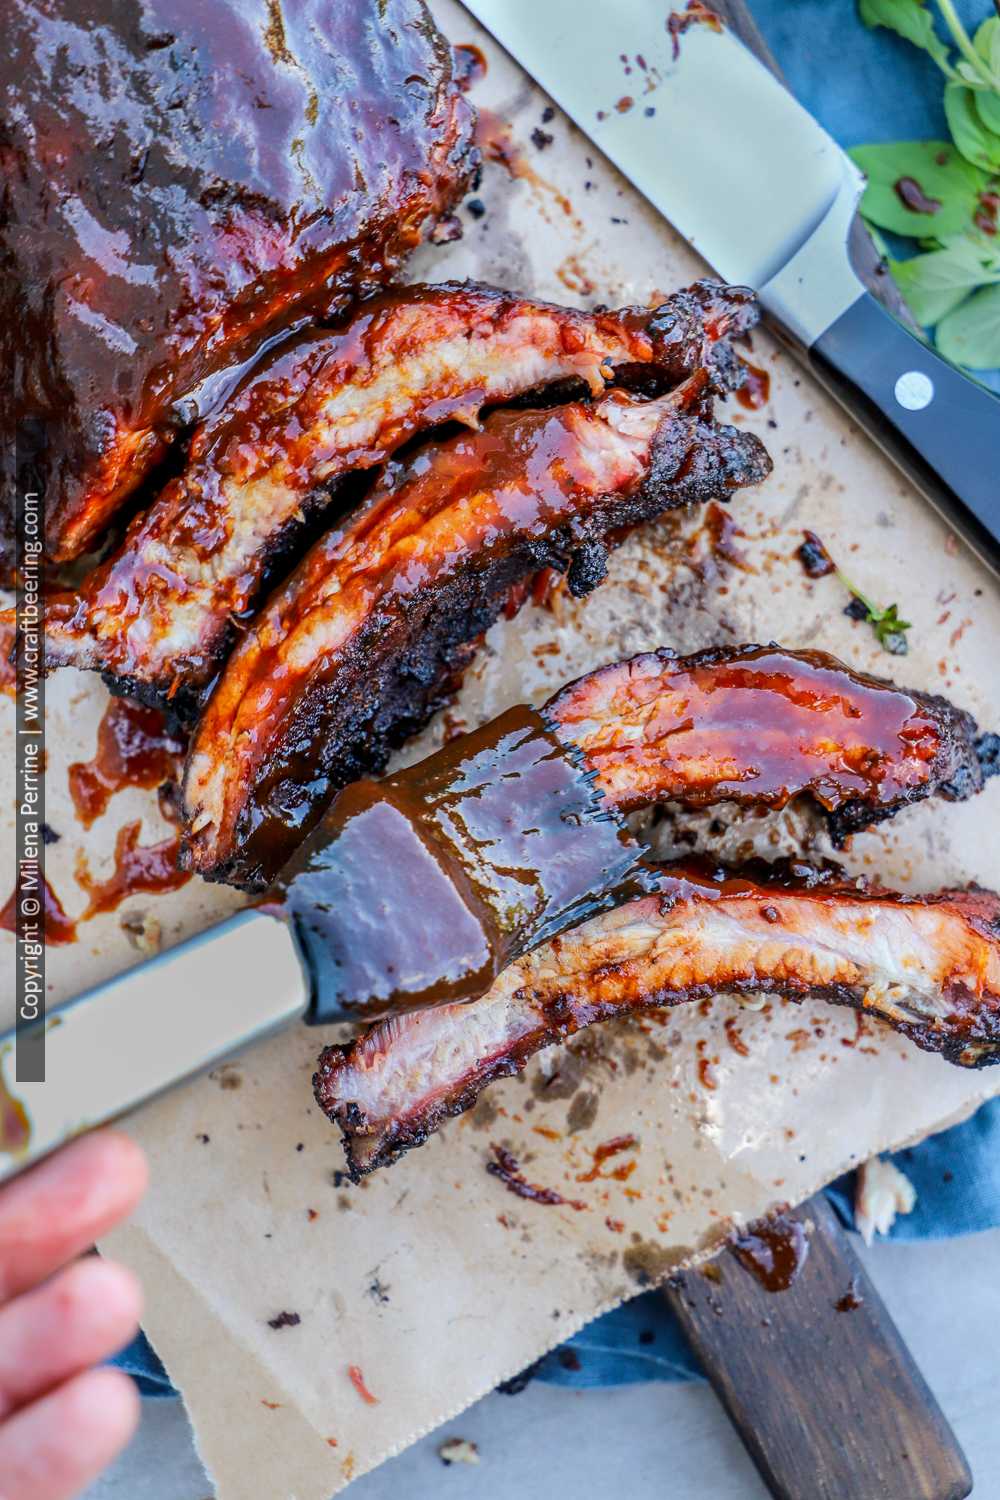 Smoked baby back ribs with barbecue sauce. 